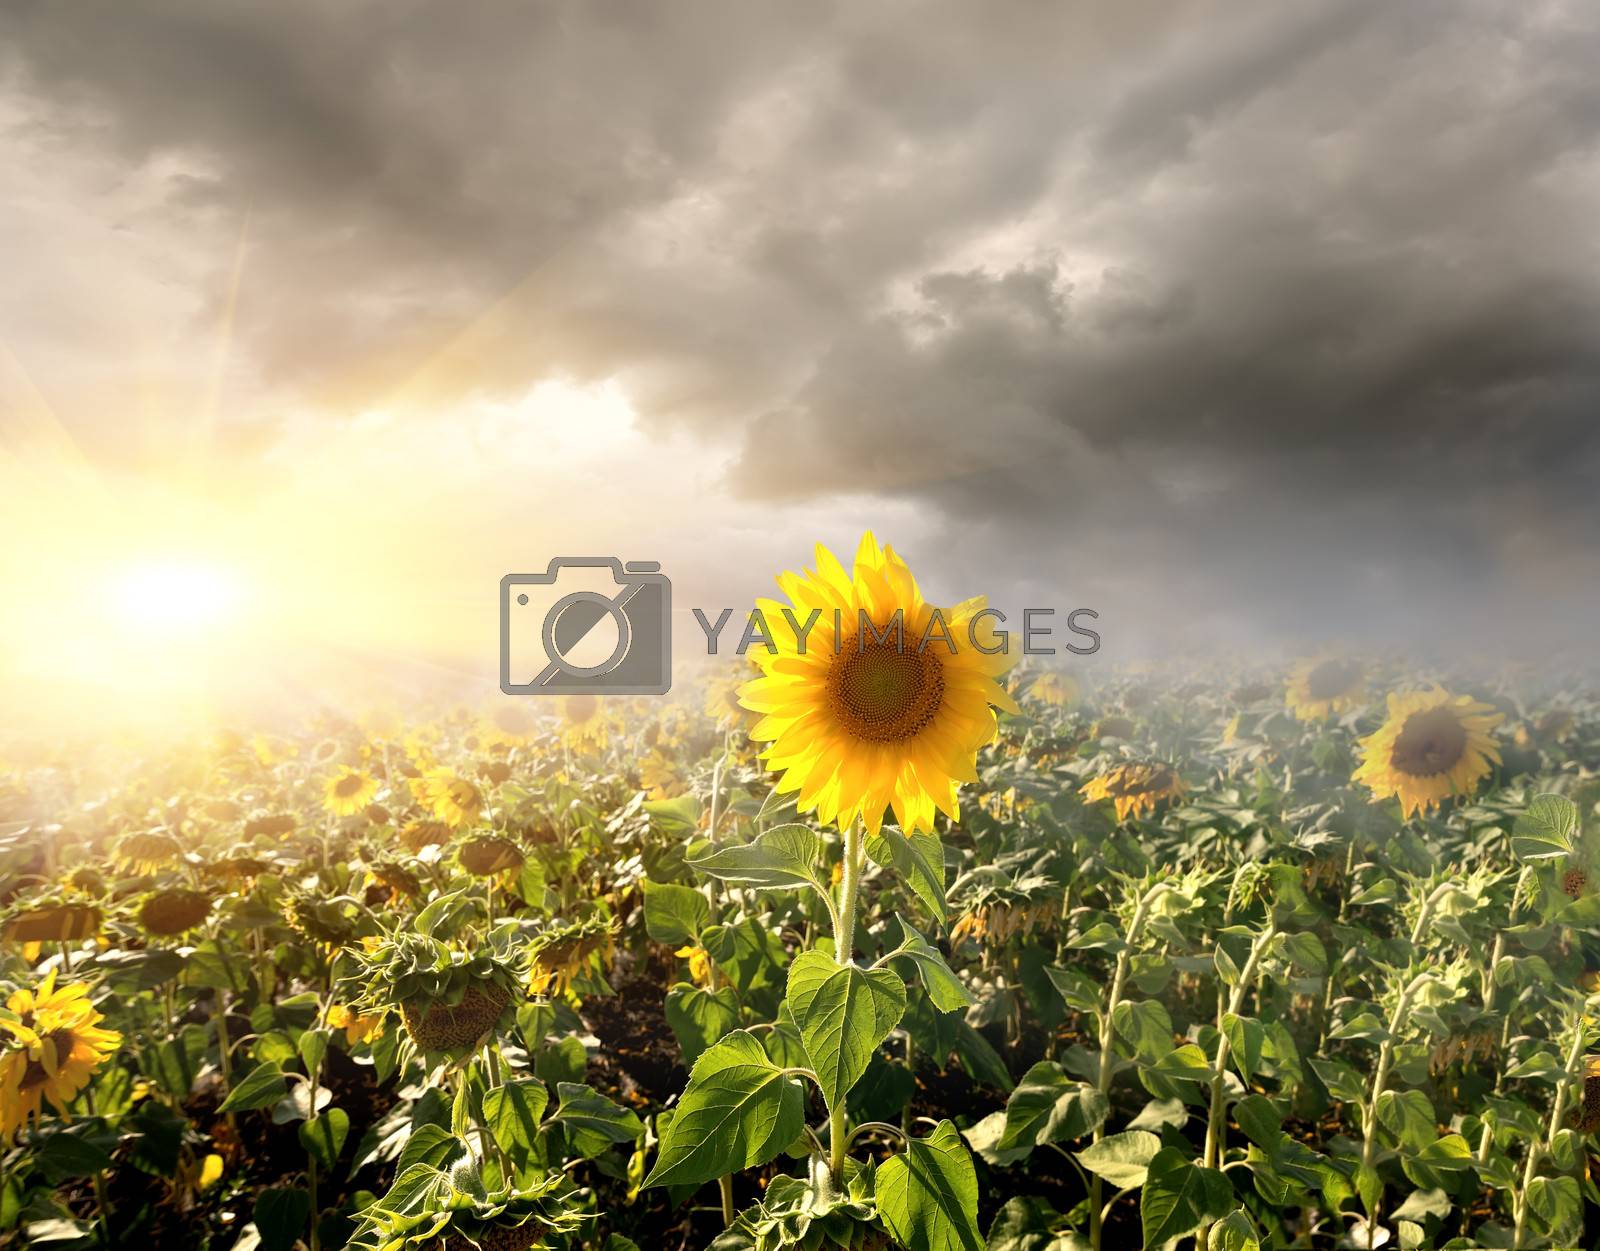 Royalty free image of Sunflowers field by Givaga